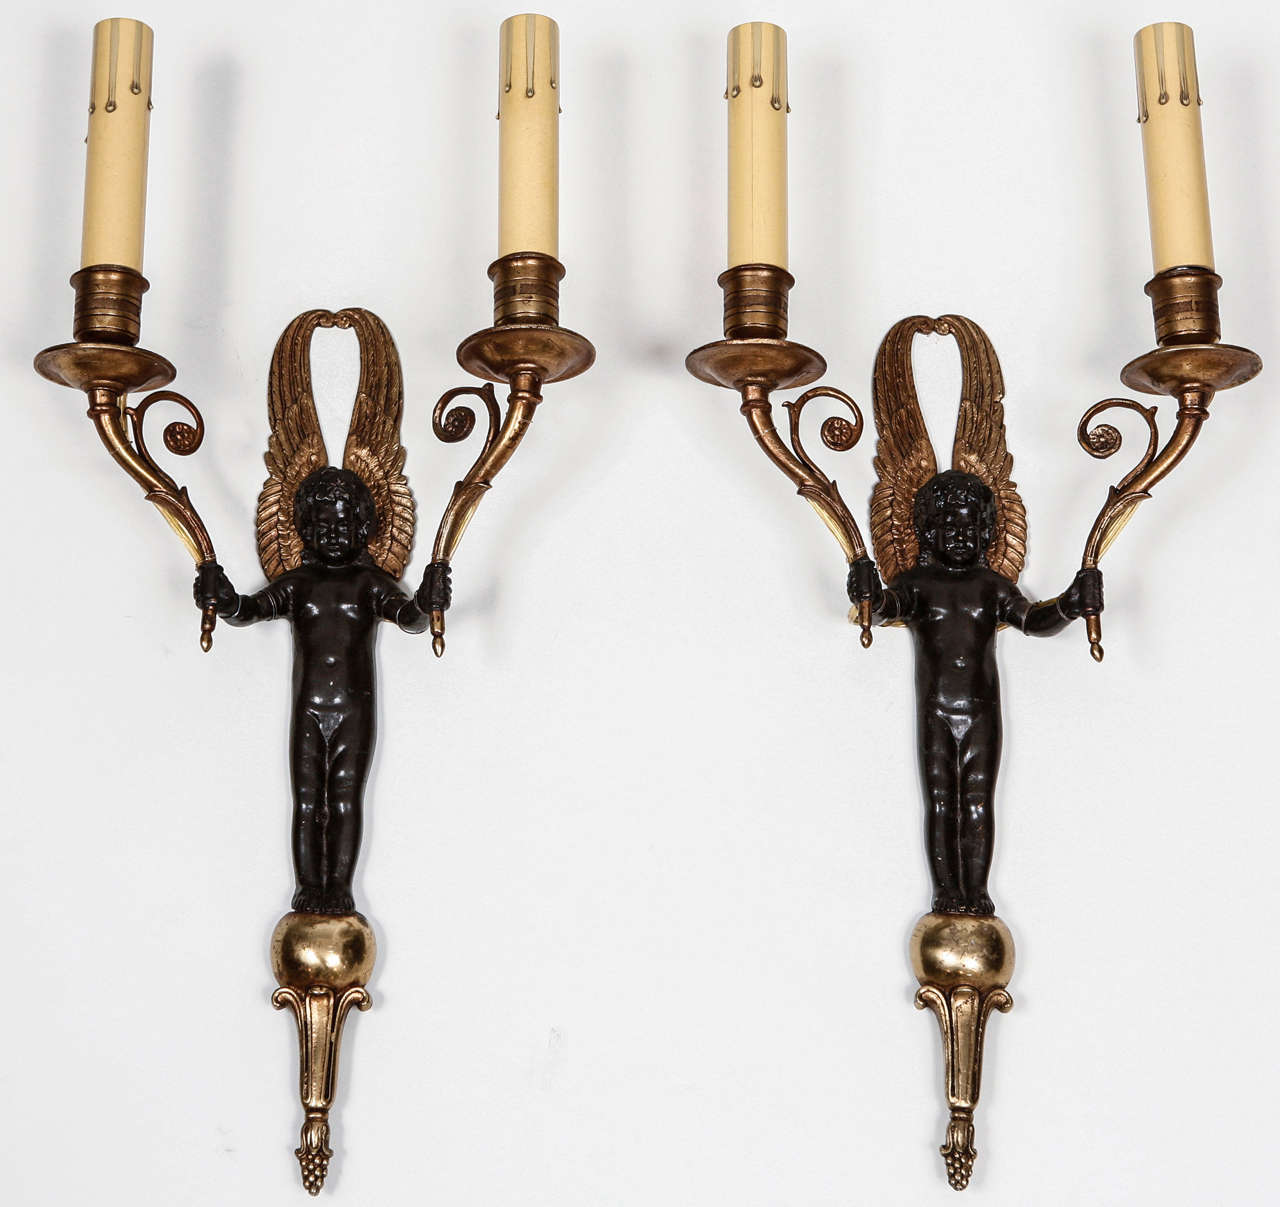 An interesting pair of figural wall sconces with each having two candle holders that have been french wired for lights.  The figures hold a light in each hand, having their wings raised as they stand on an orb. These sconces will add to any setting